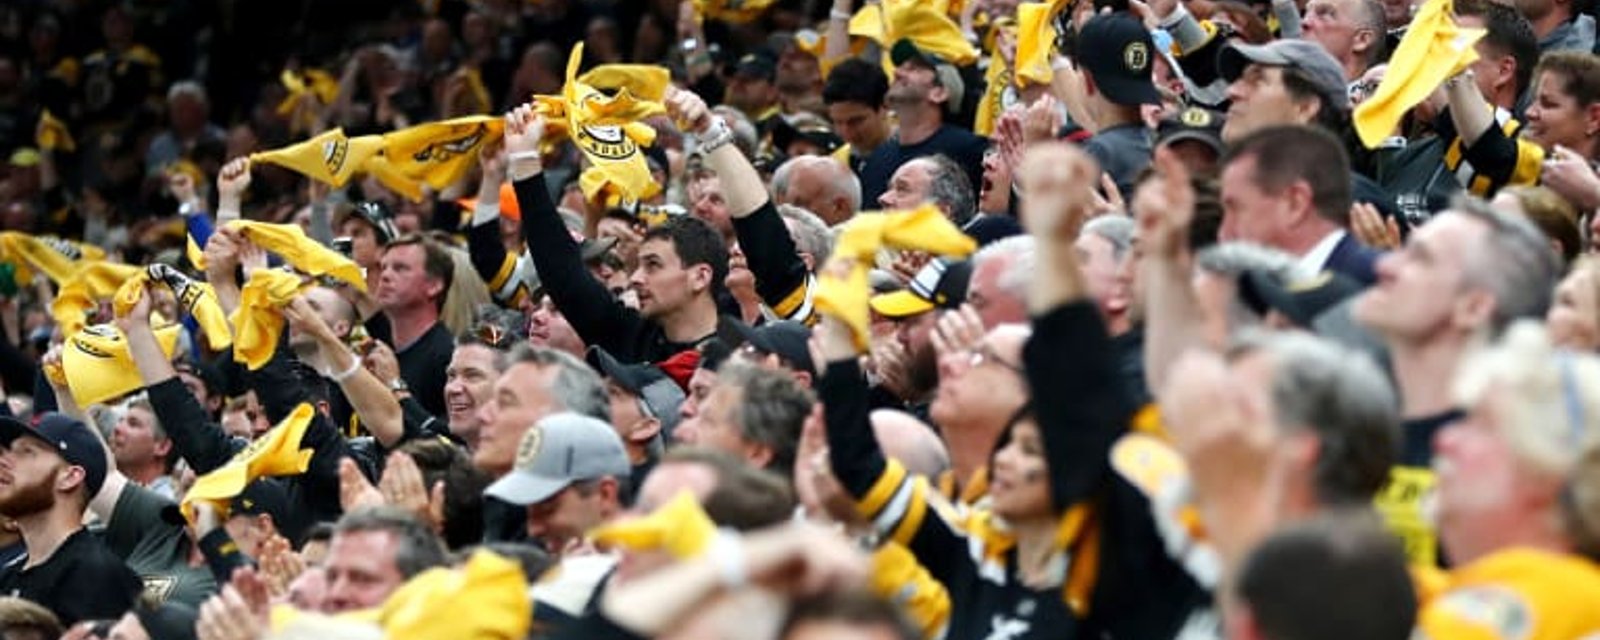 League sources reports the NHL will allow fans to attend games in some markets 